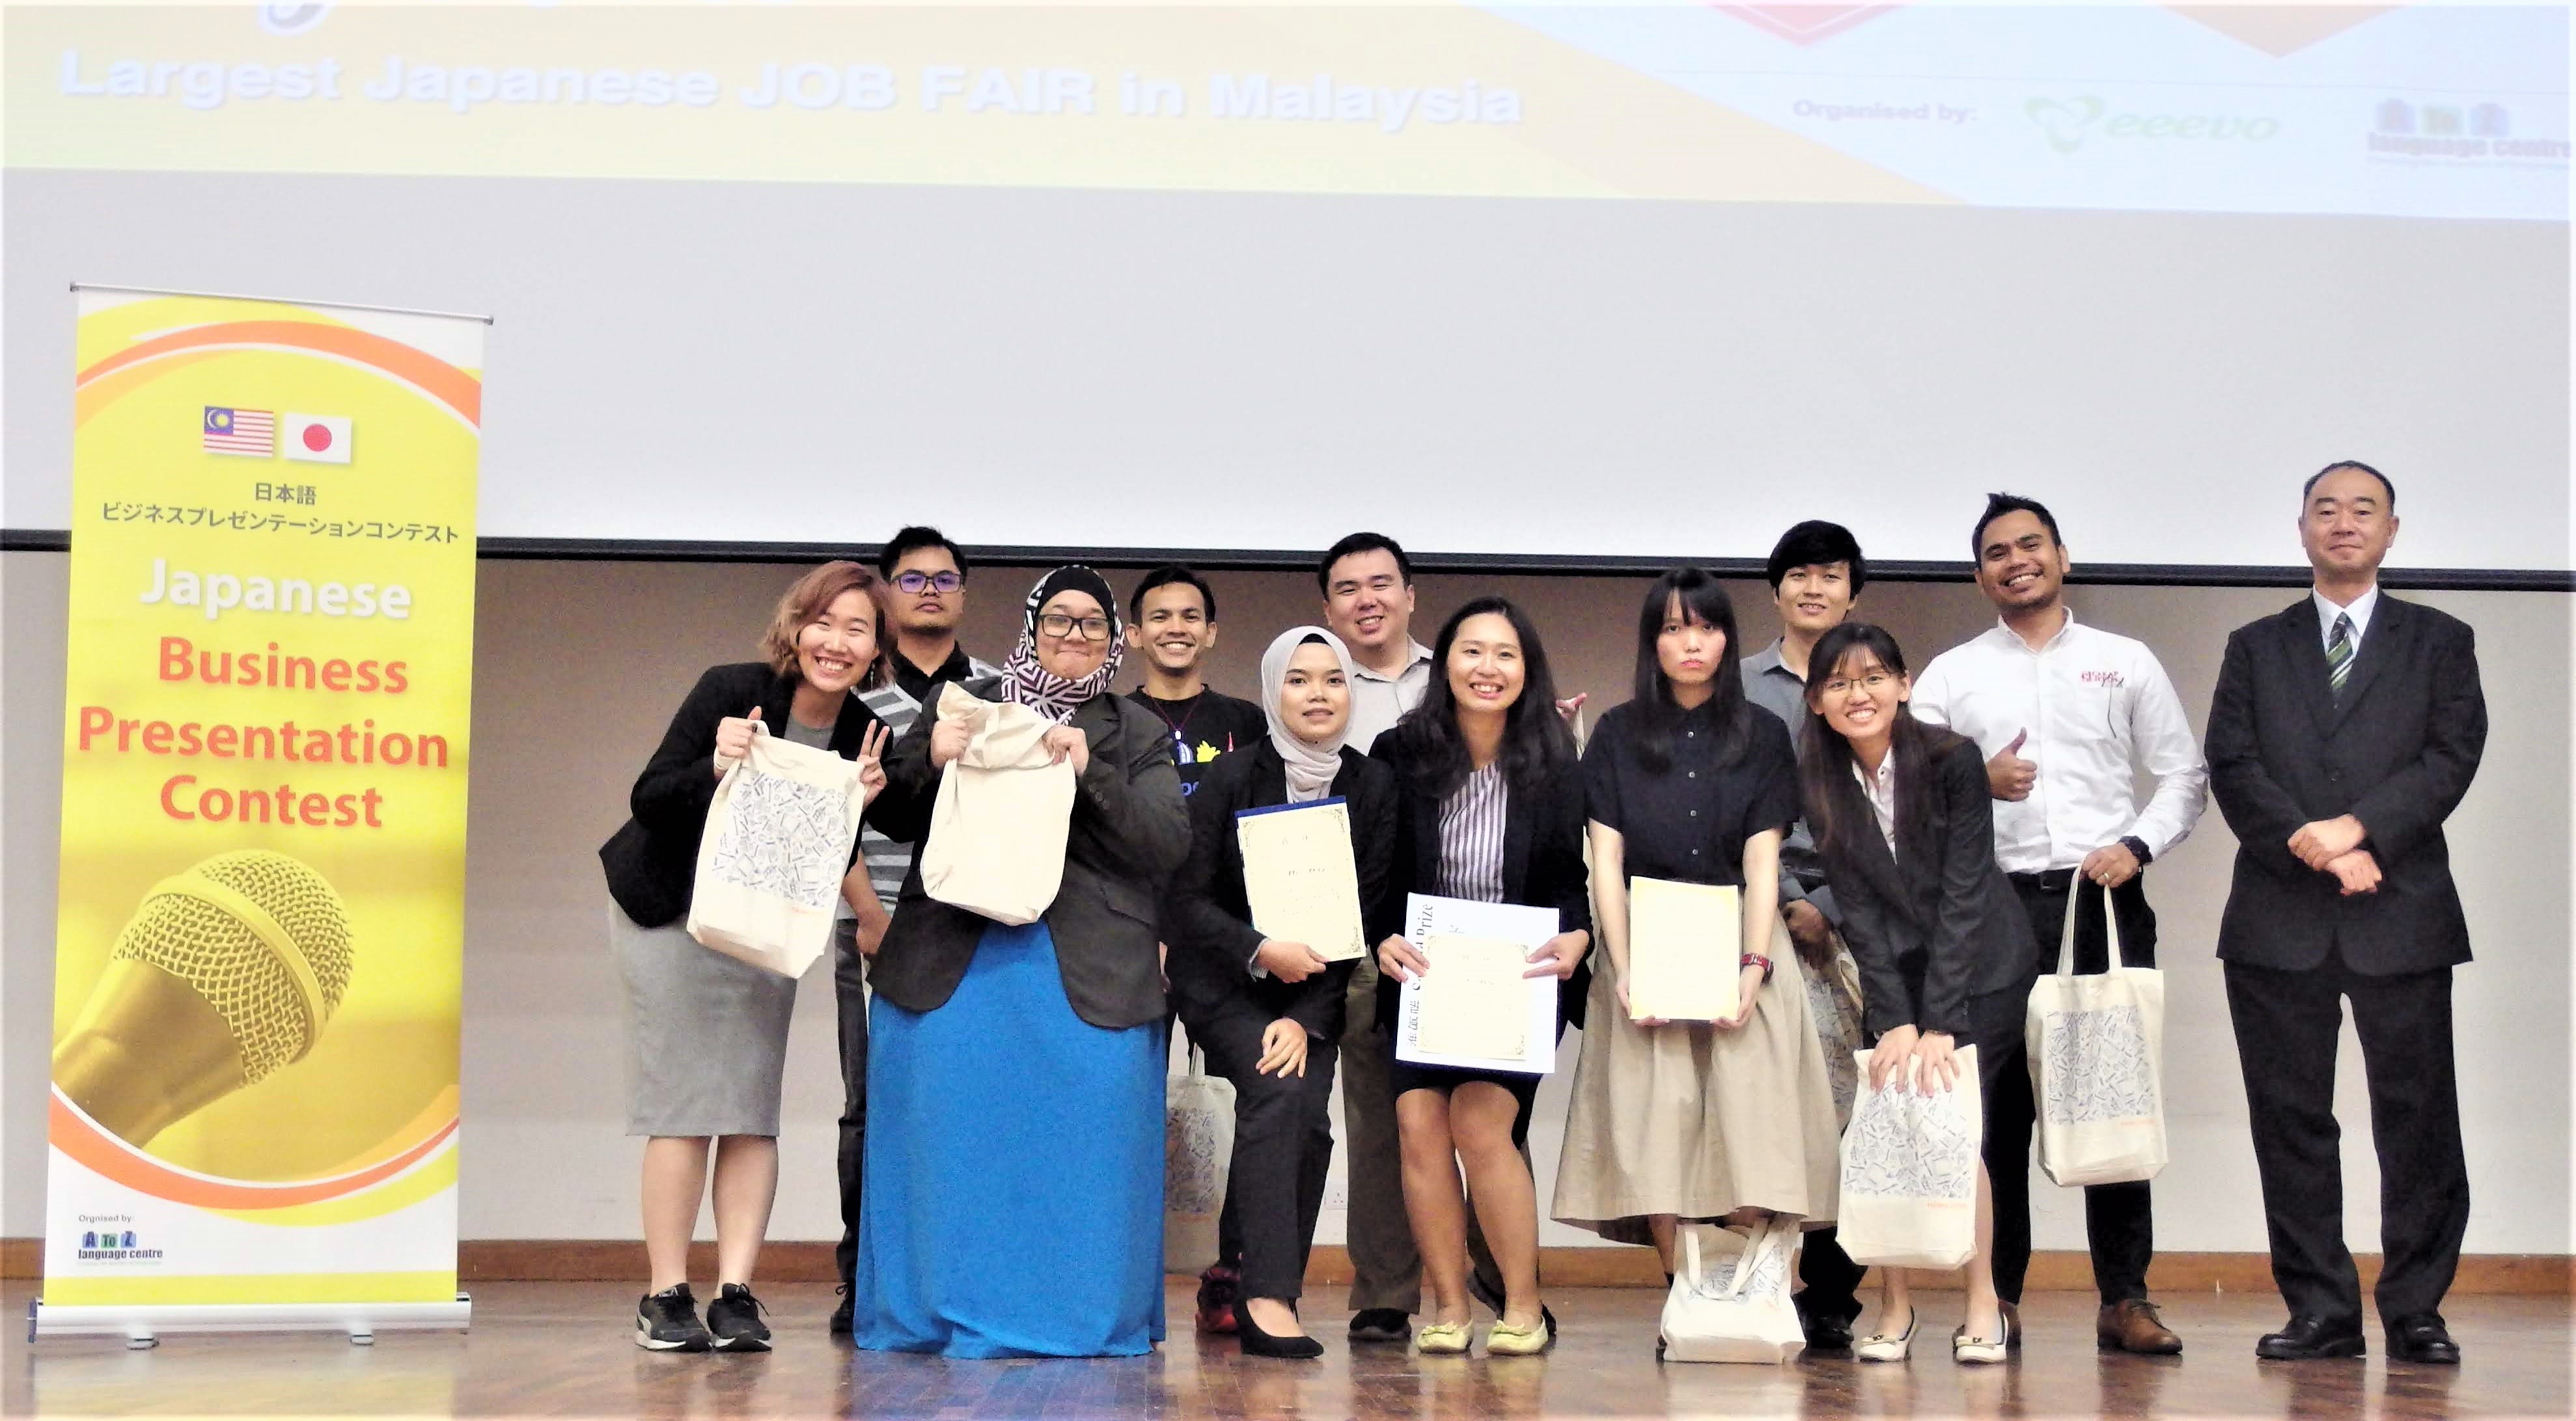 The 4th Japanese Business Presentation Contest